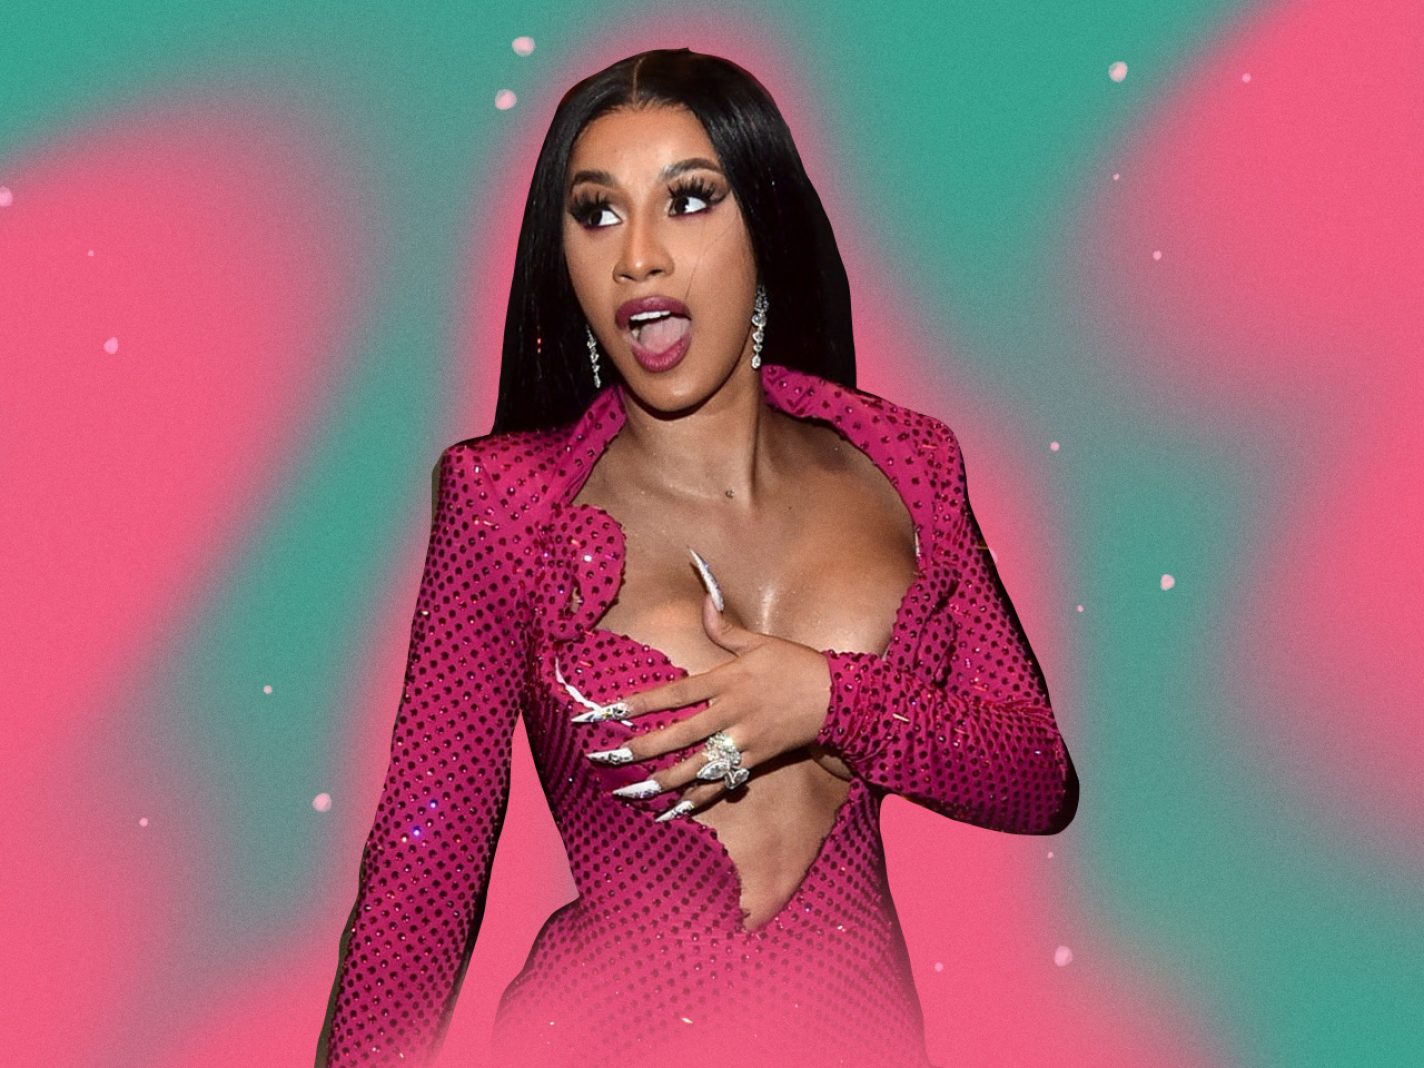 Fans Post Photos of Their Boobs After Cardi B Is Criticized for Now Deleted...